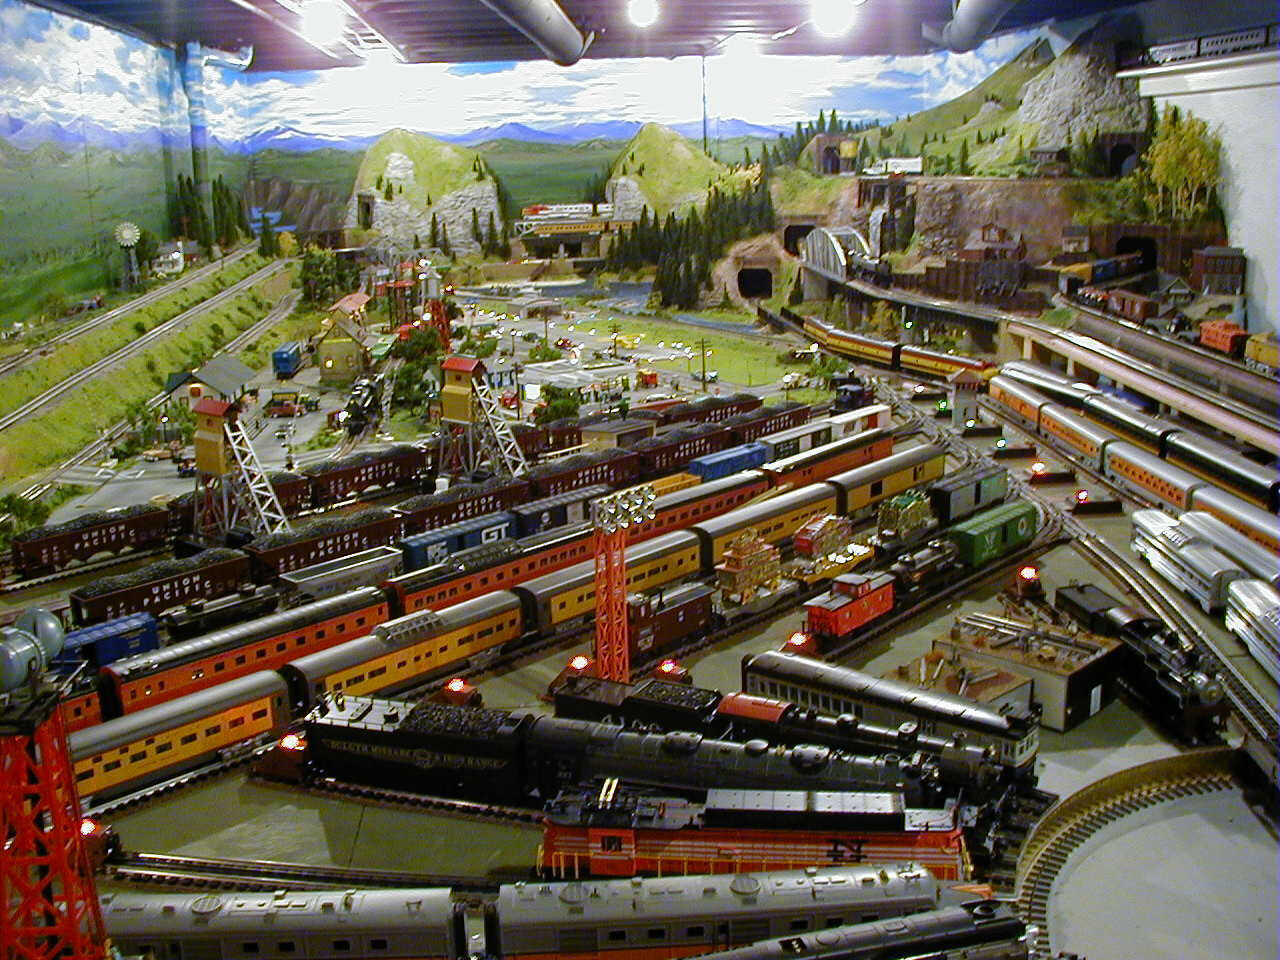  on this awesome ho train layout the train toy train ho design layout